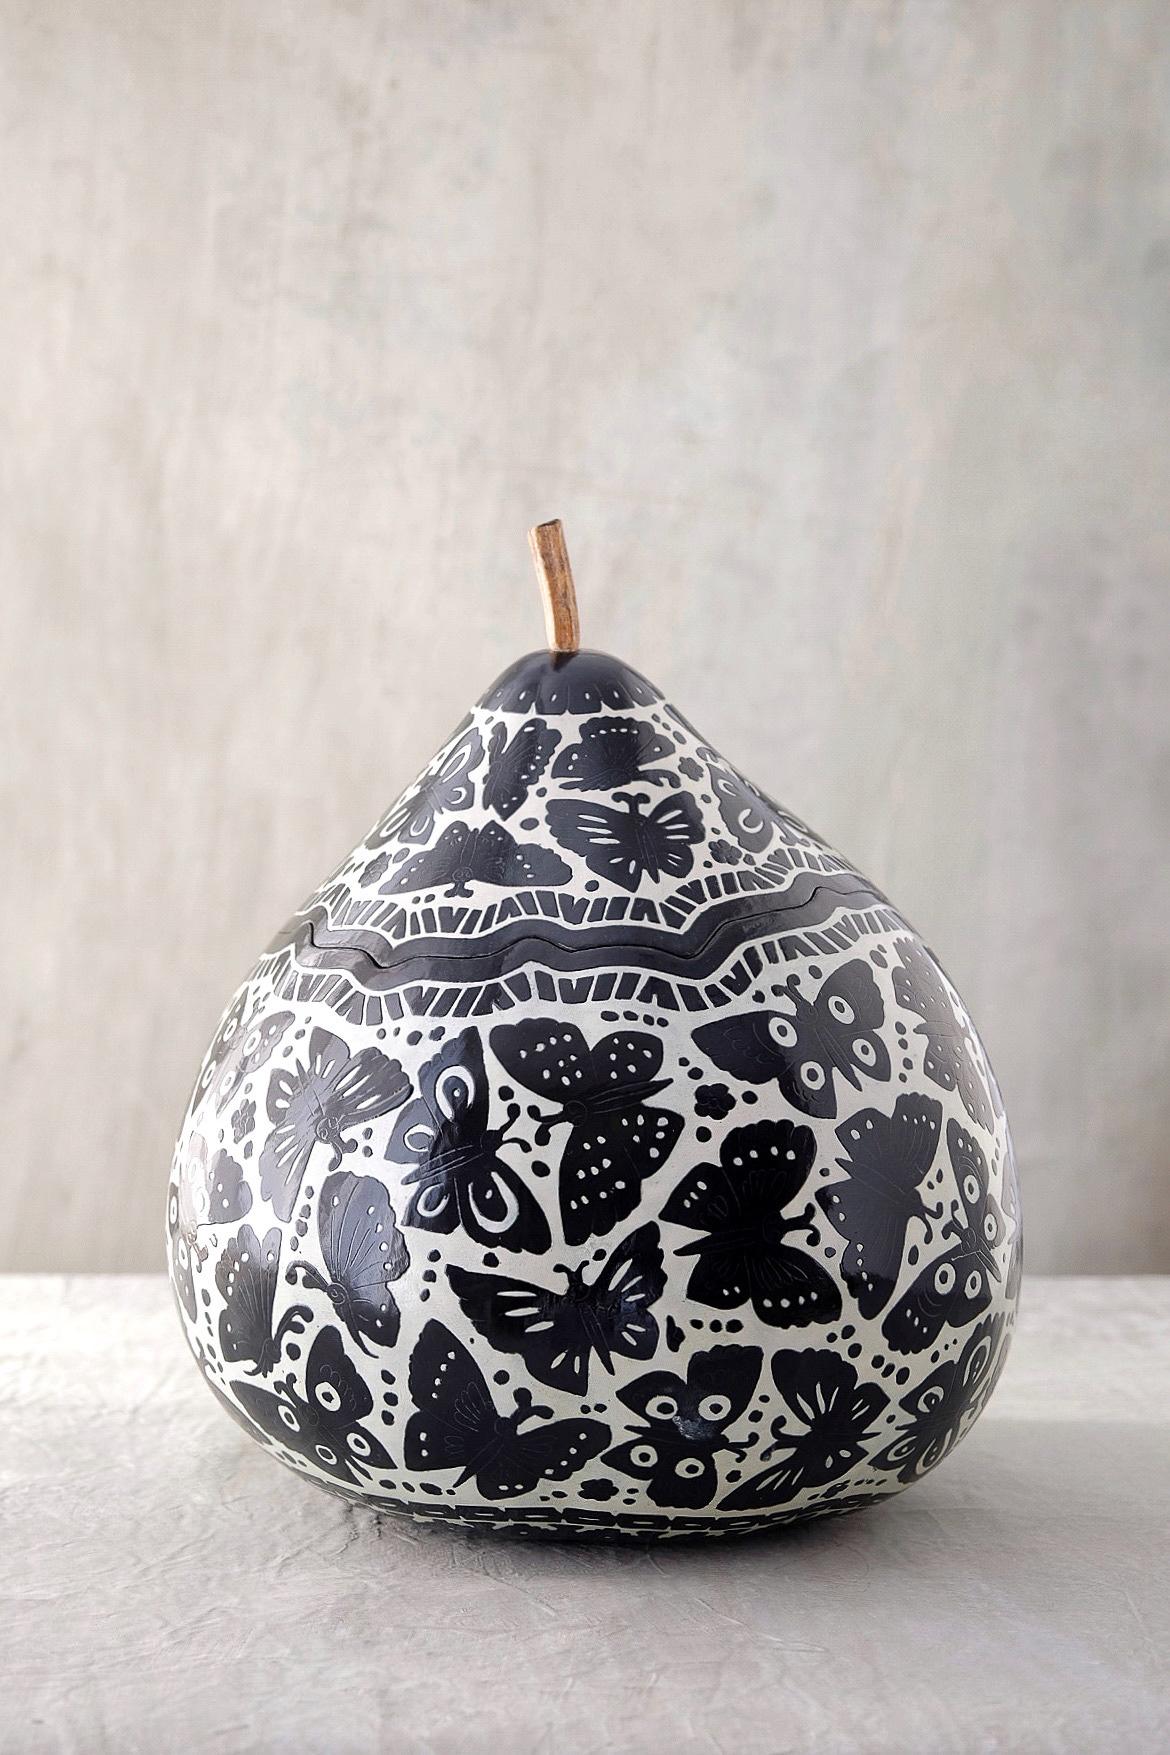 Guaje oli gourd by Onora
Dimensions: 37 x 25 cm
Materials: Gourd, Natural pigments mixed with chia oil and then hand burnished with river stones
Guaje is a fruit, each piece has a different size.

Hand lacquered gourds have a long and rich